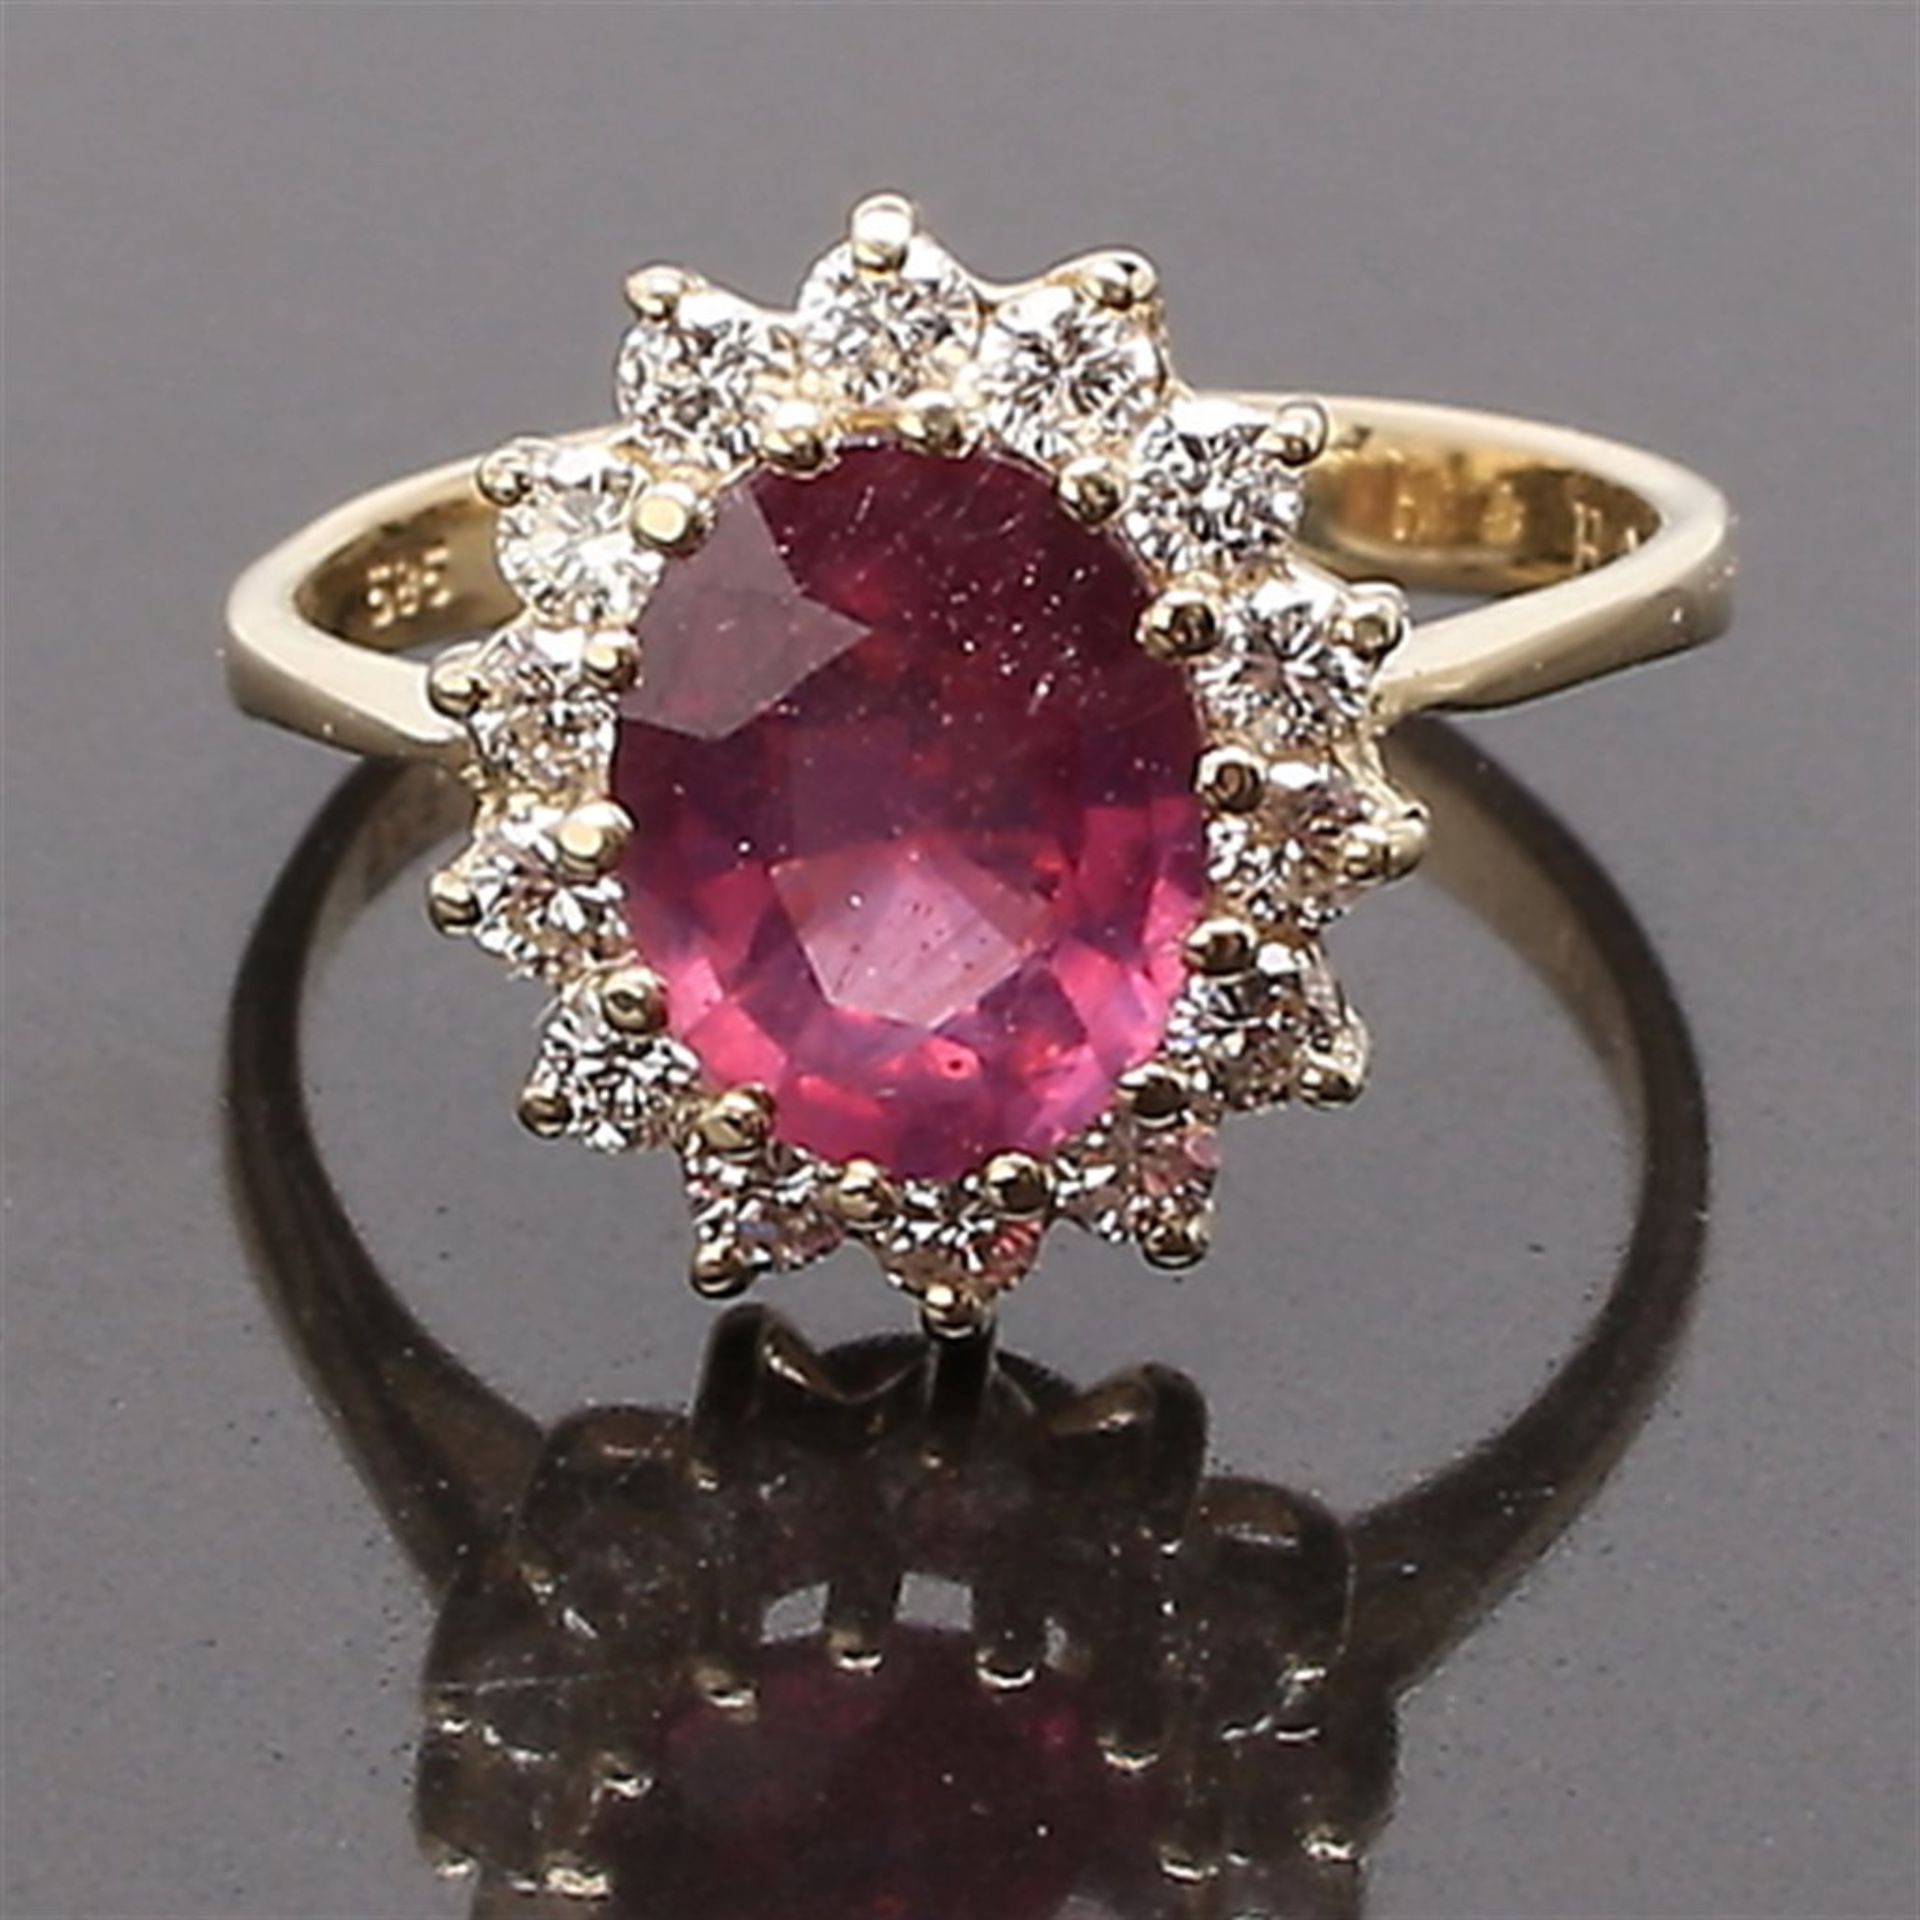 Carmo ring with oval ruby and diamonds. - Image 2 of 2